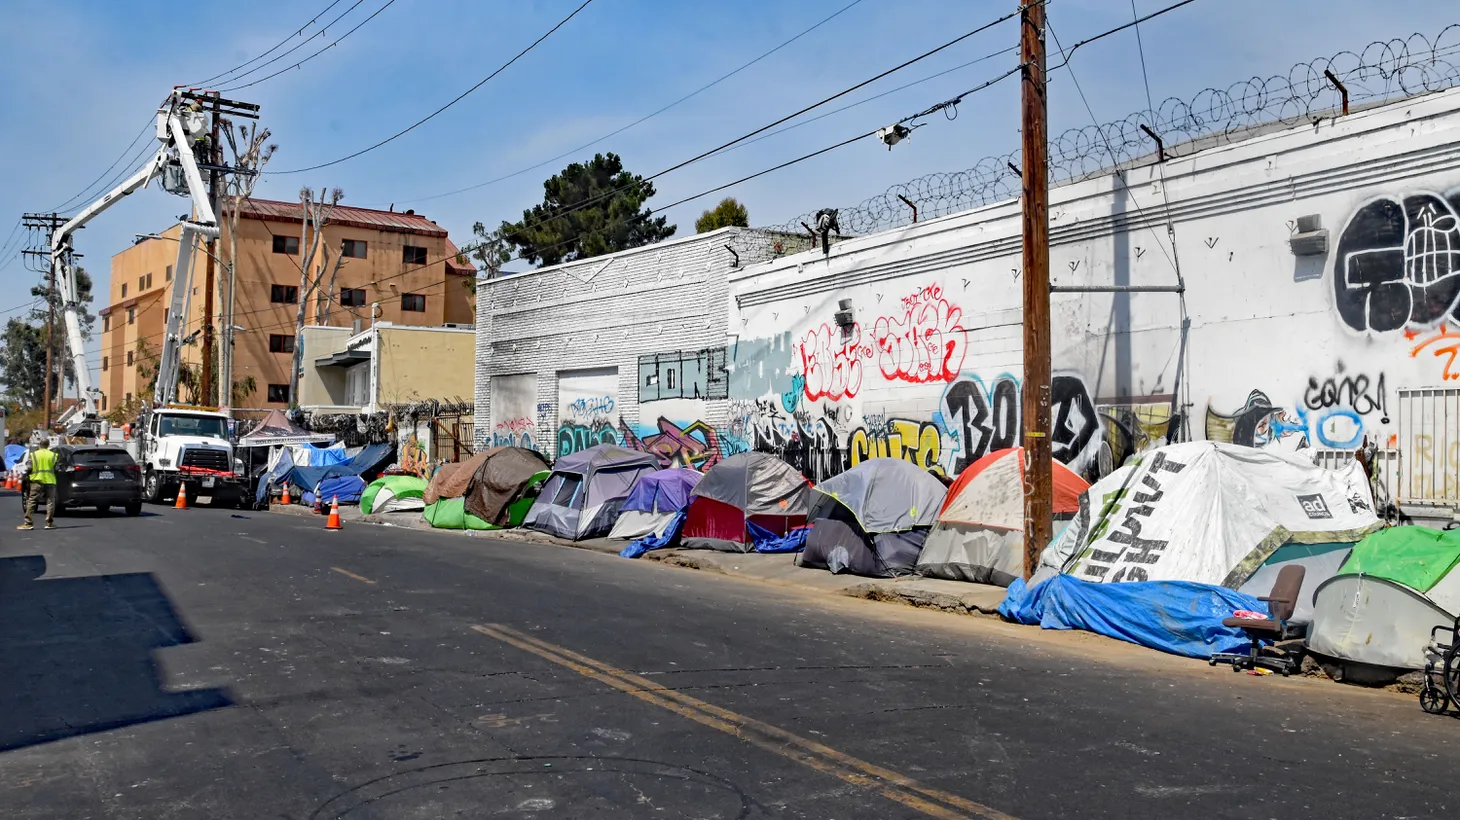 Tent encampments used to be rare on Skid Row. Now they take up city blocks